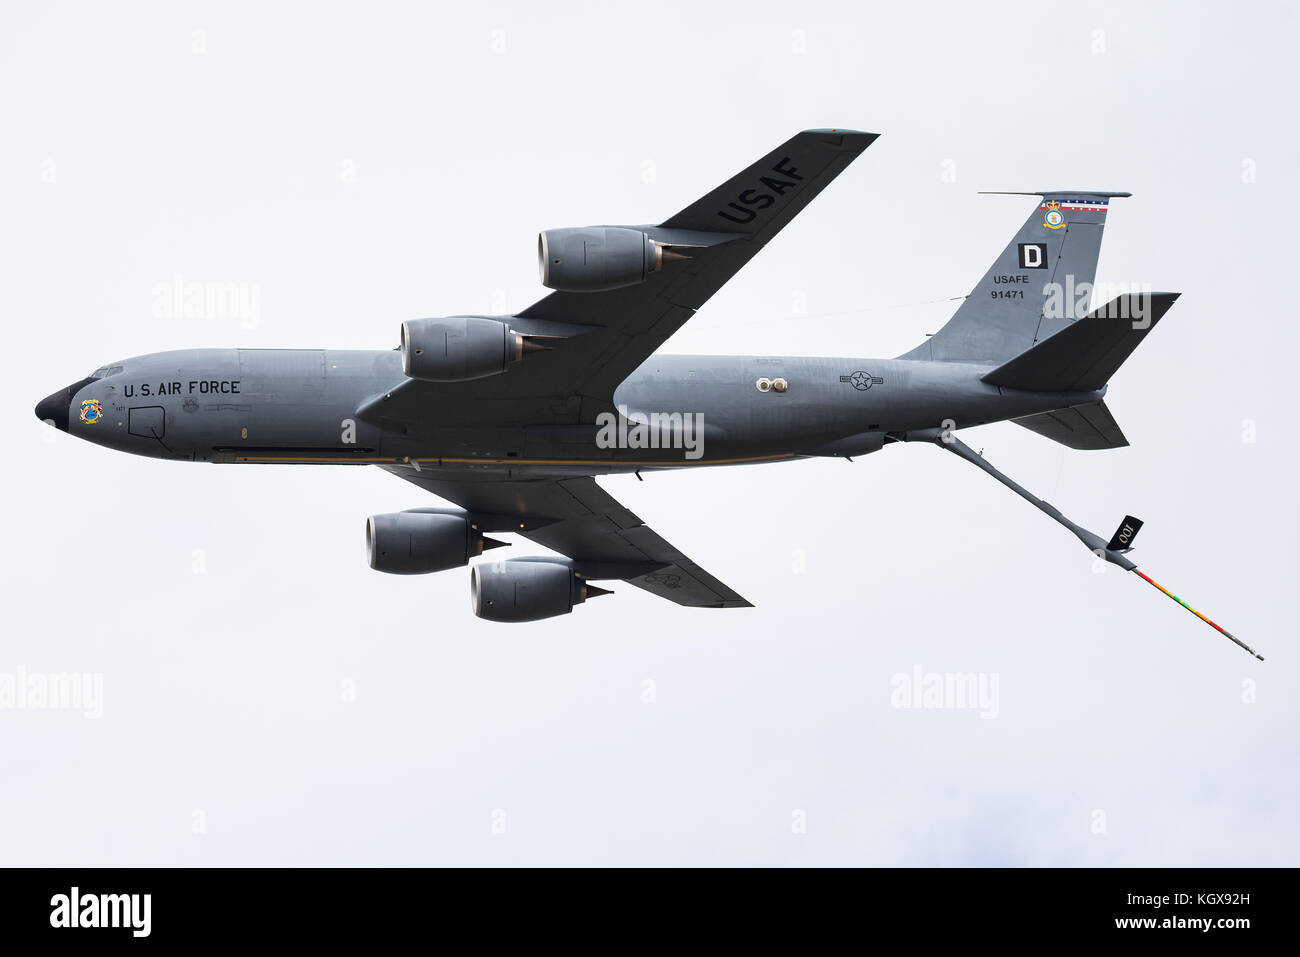 A USAF Boeing KC-135R Stratotanker tanker aircraft of the 351st Air Refueling Squadron during a flypast at the RIAT 2017 airshow. Stock Photo